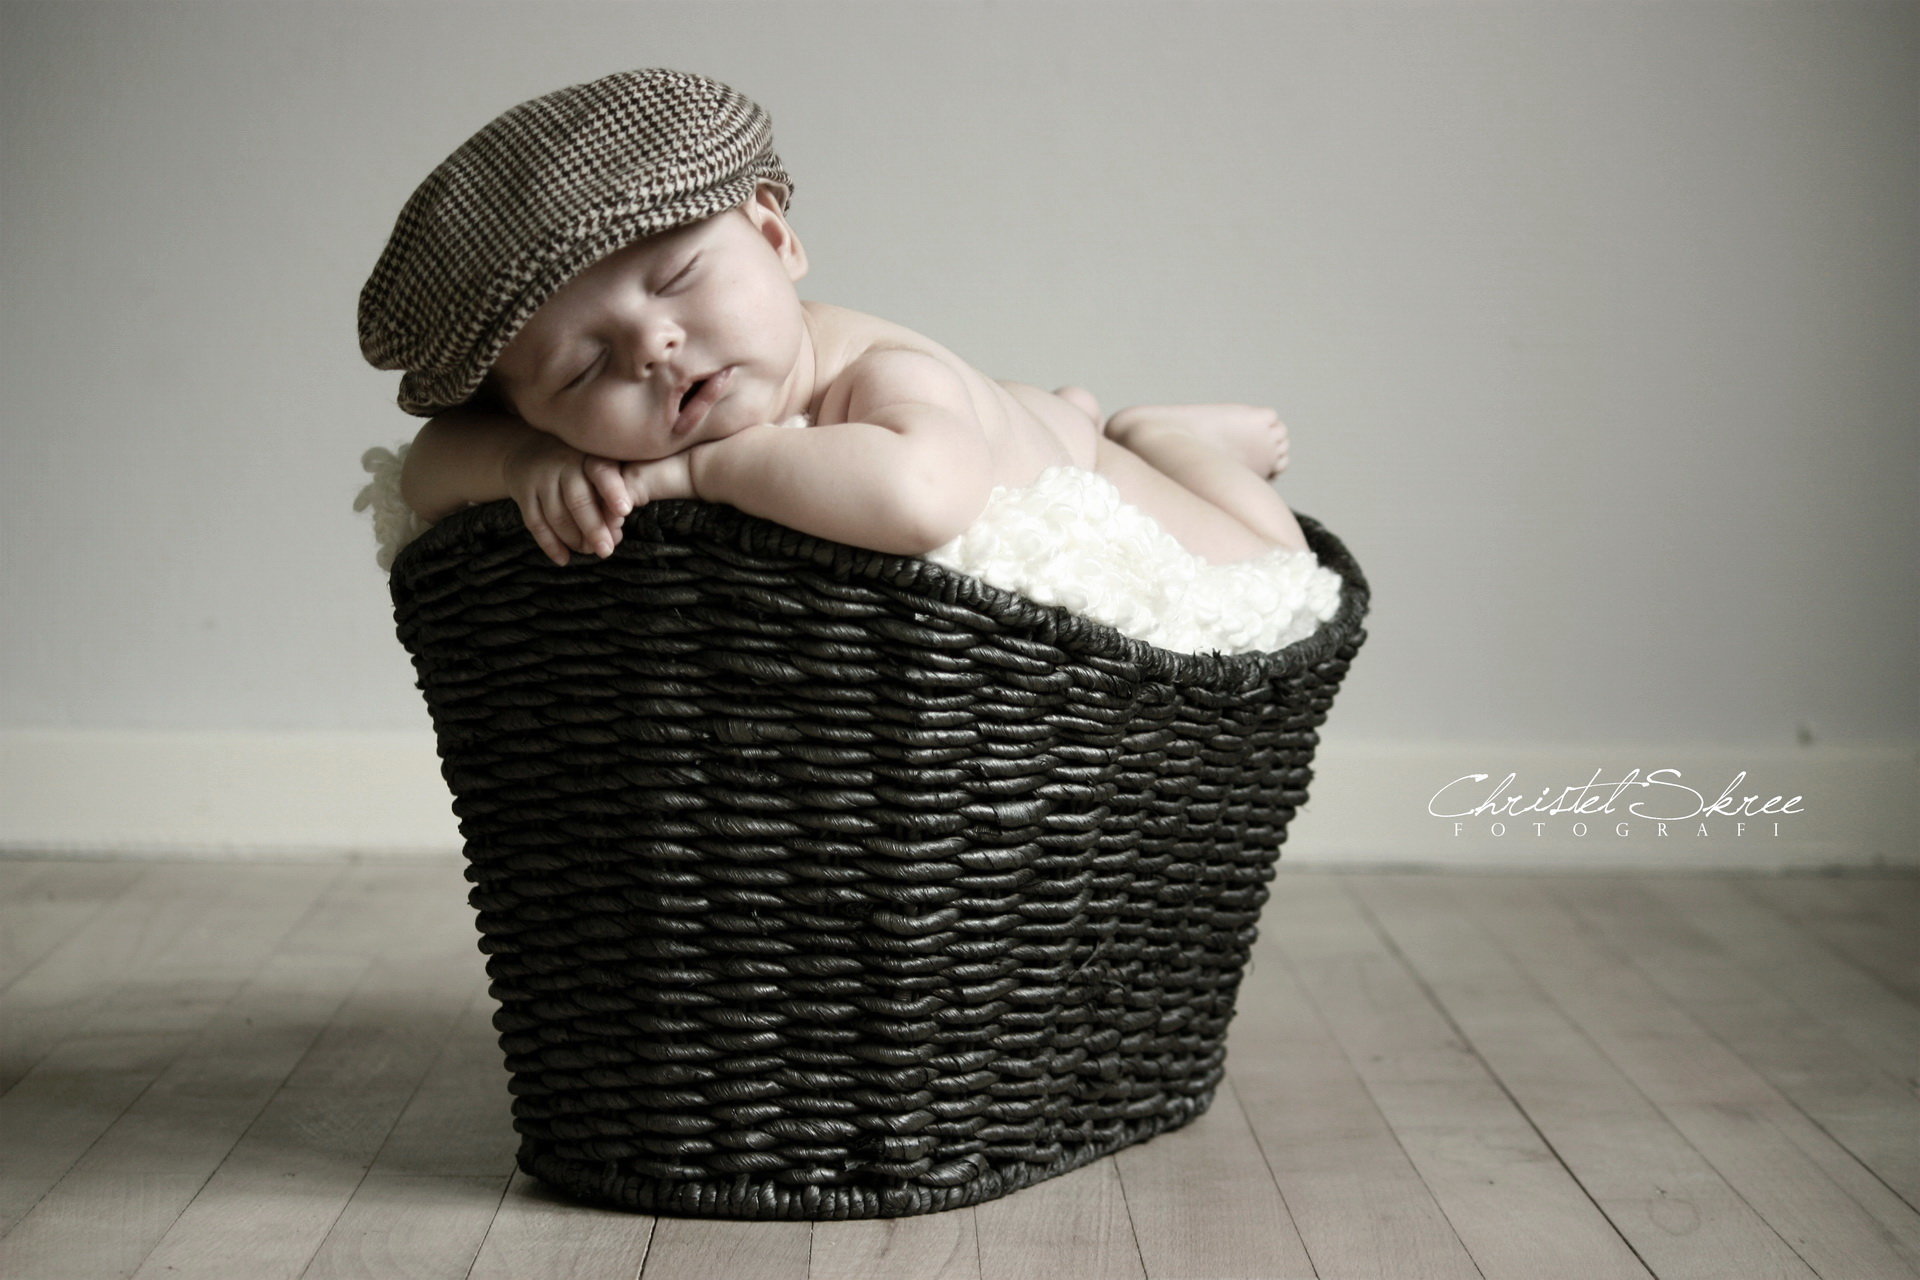 High Resolution Baby Hd 1920x1280 Wallpaper Id 142671 For Desktop Images, Photos, Reviews